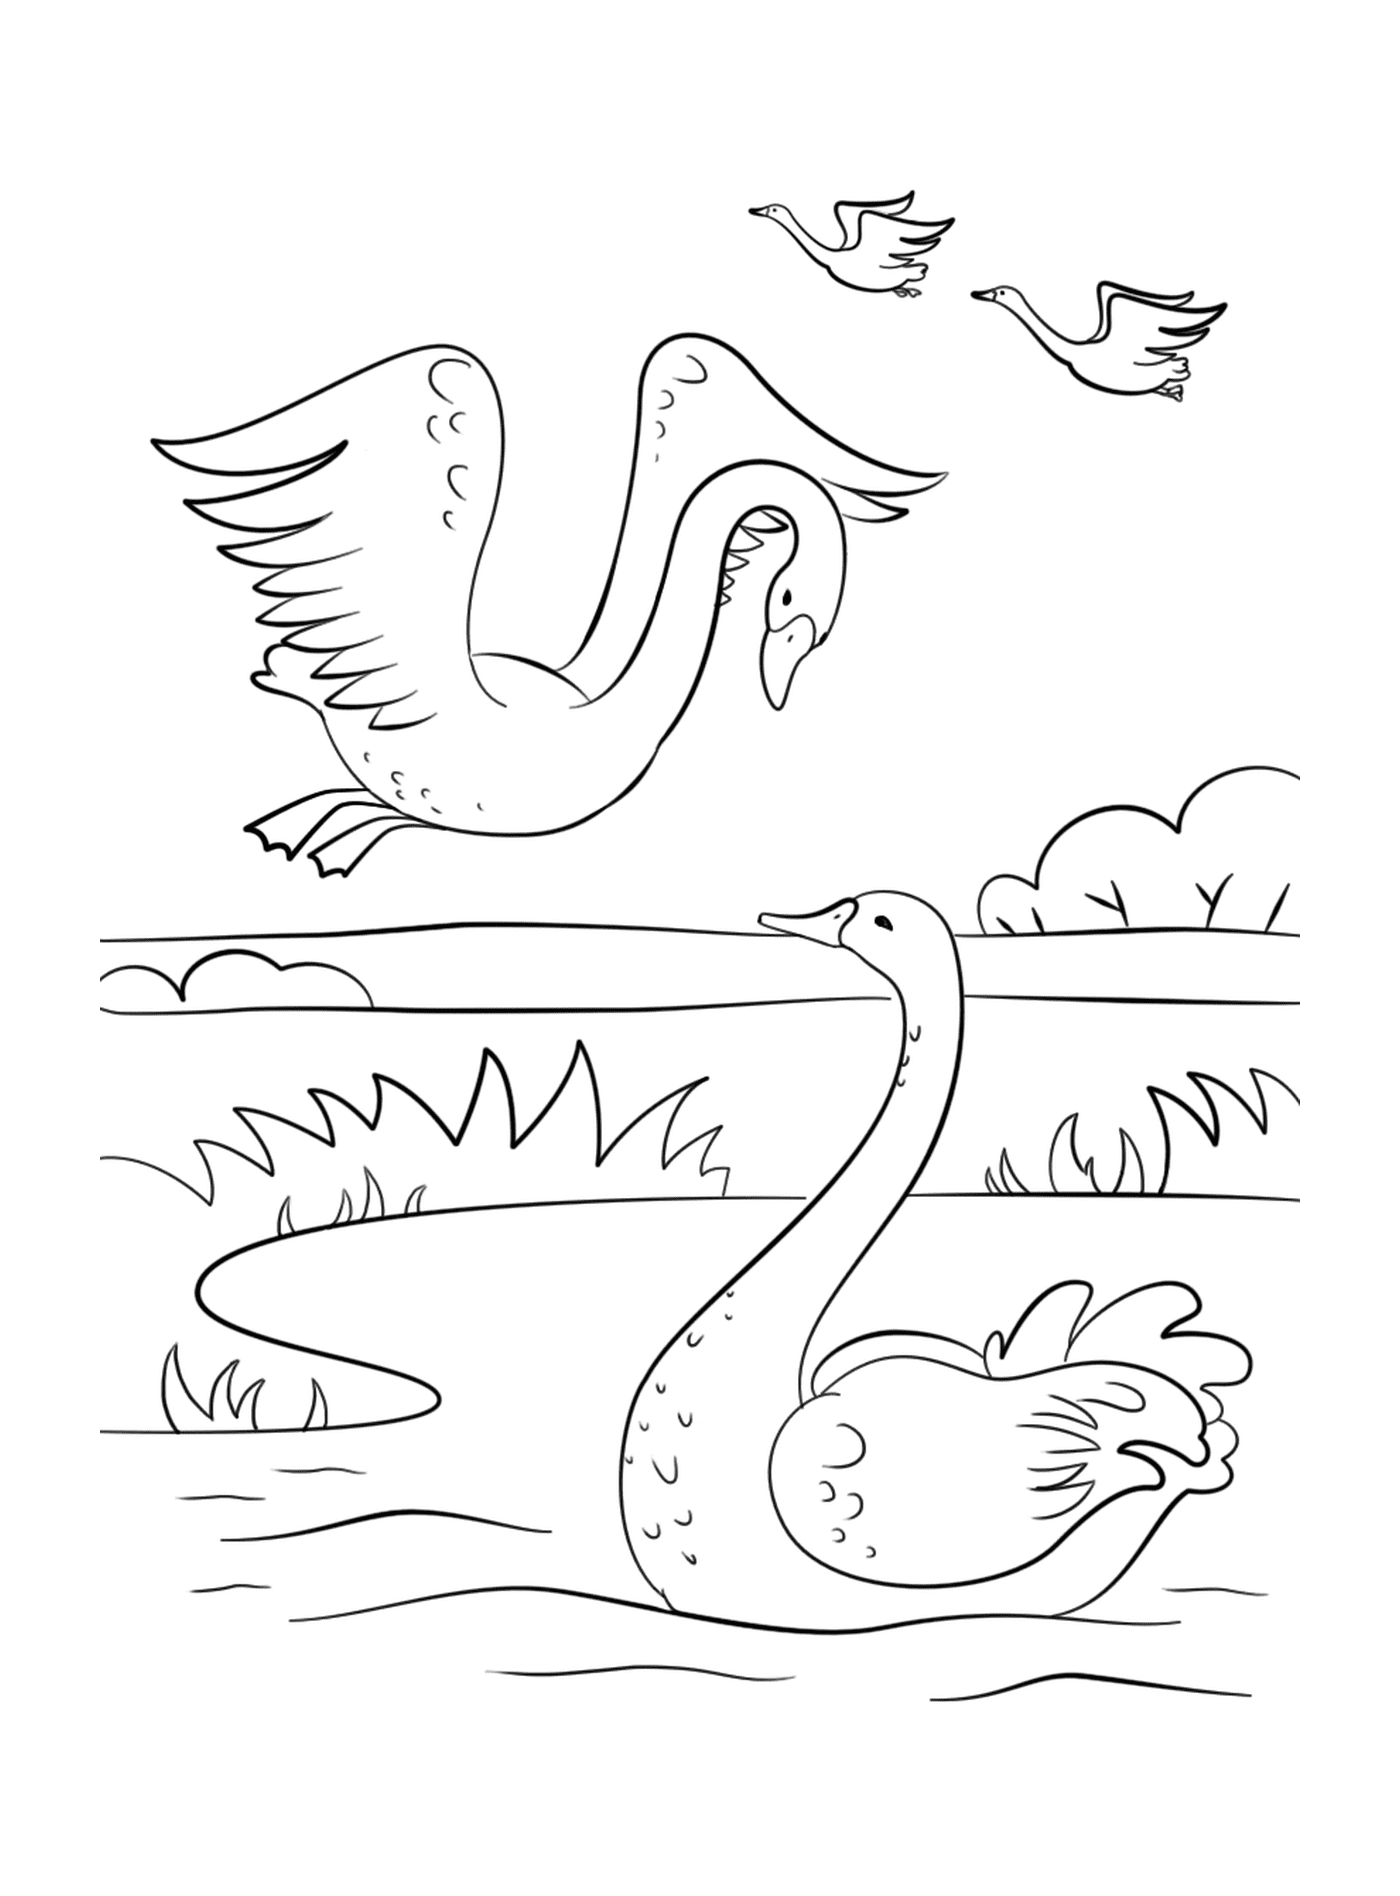  A swan and a goose swimming in a pond 